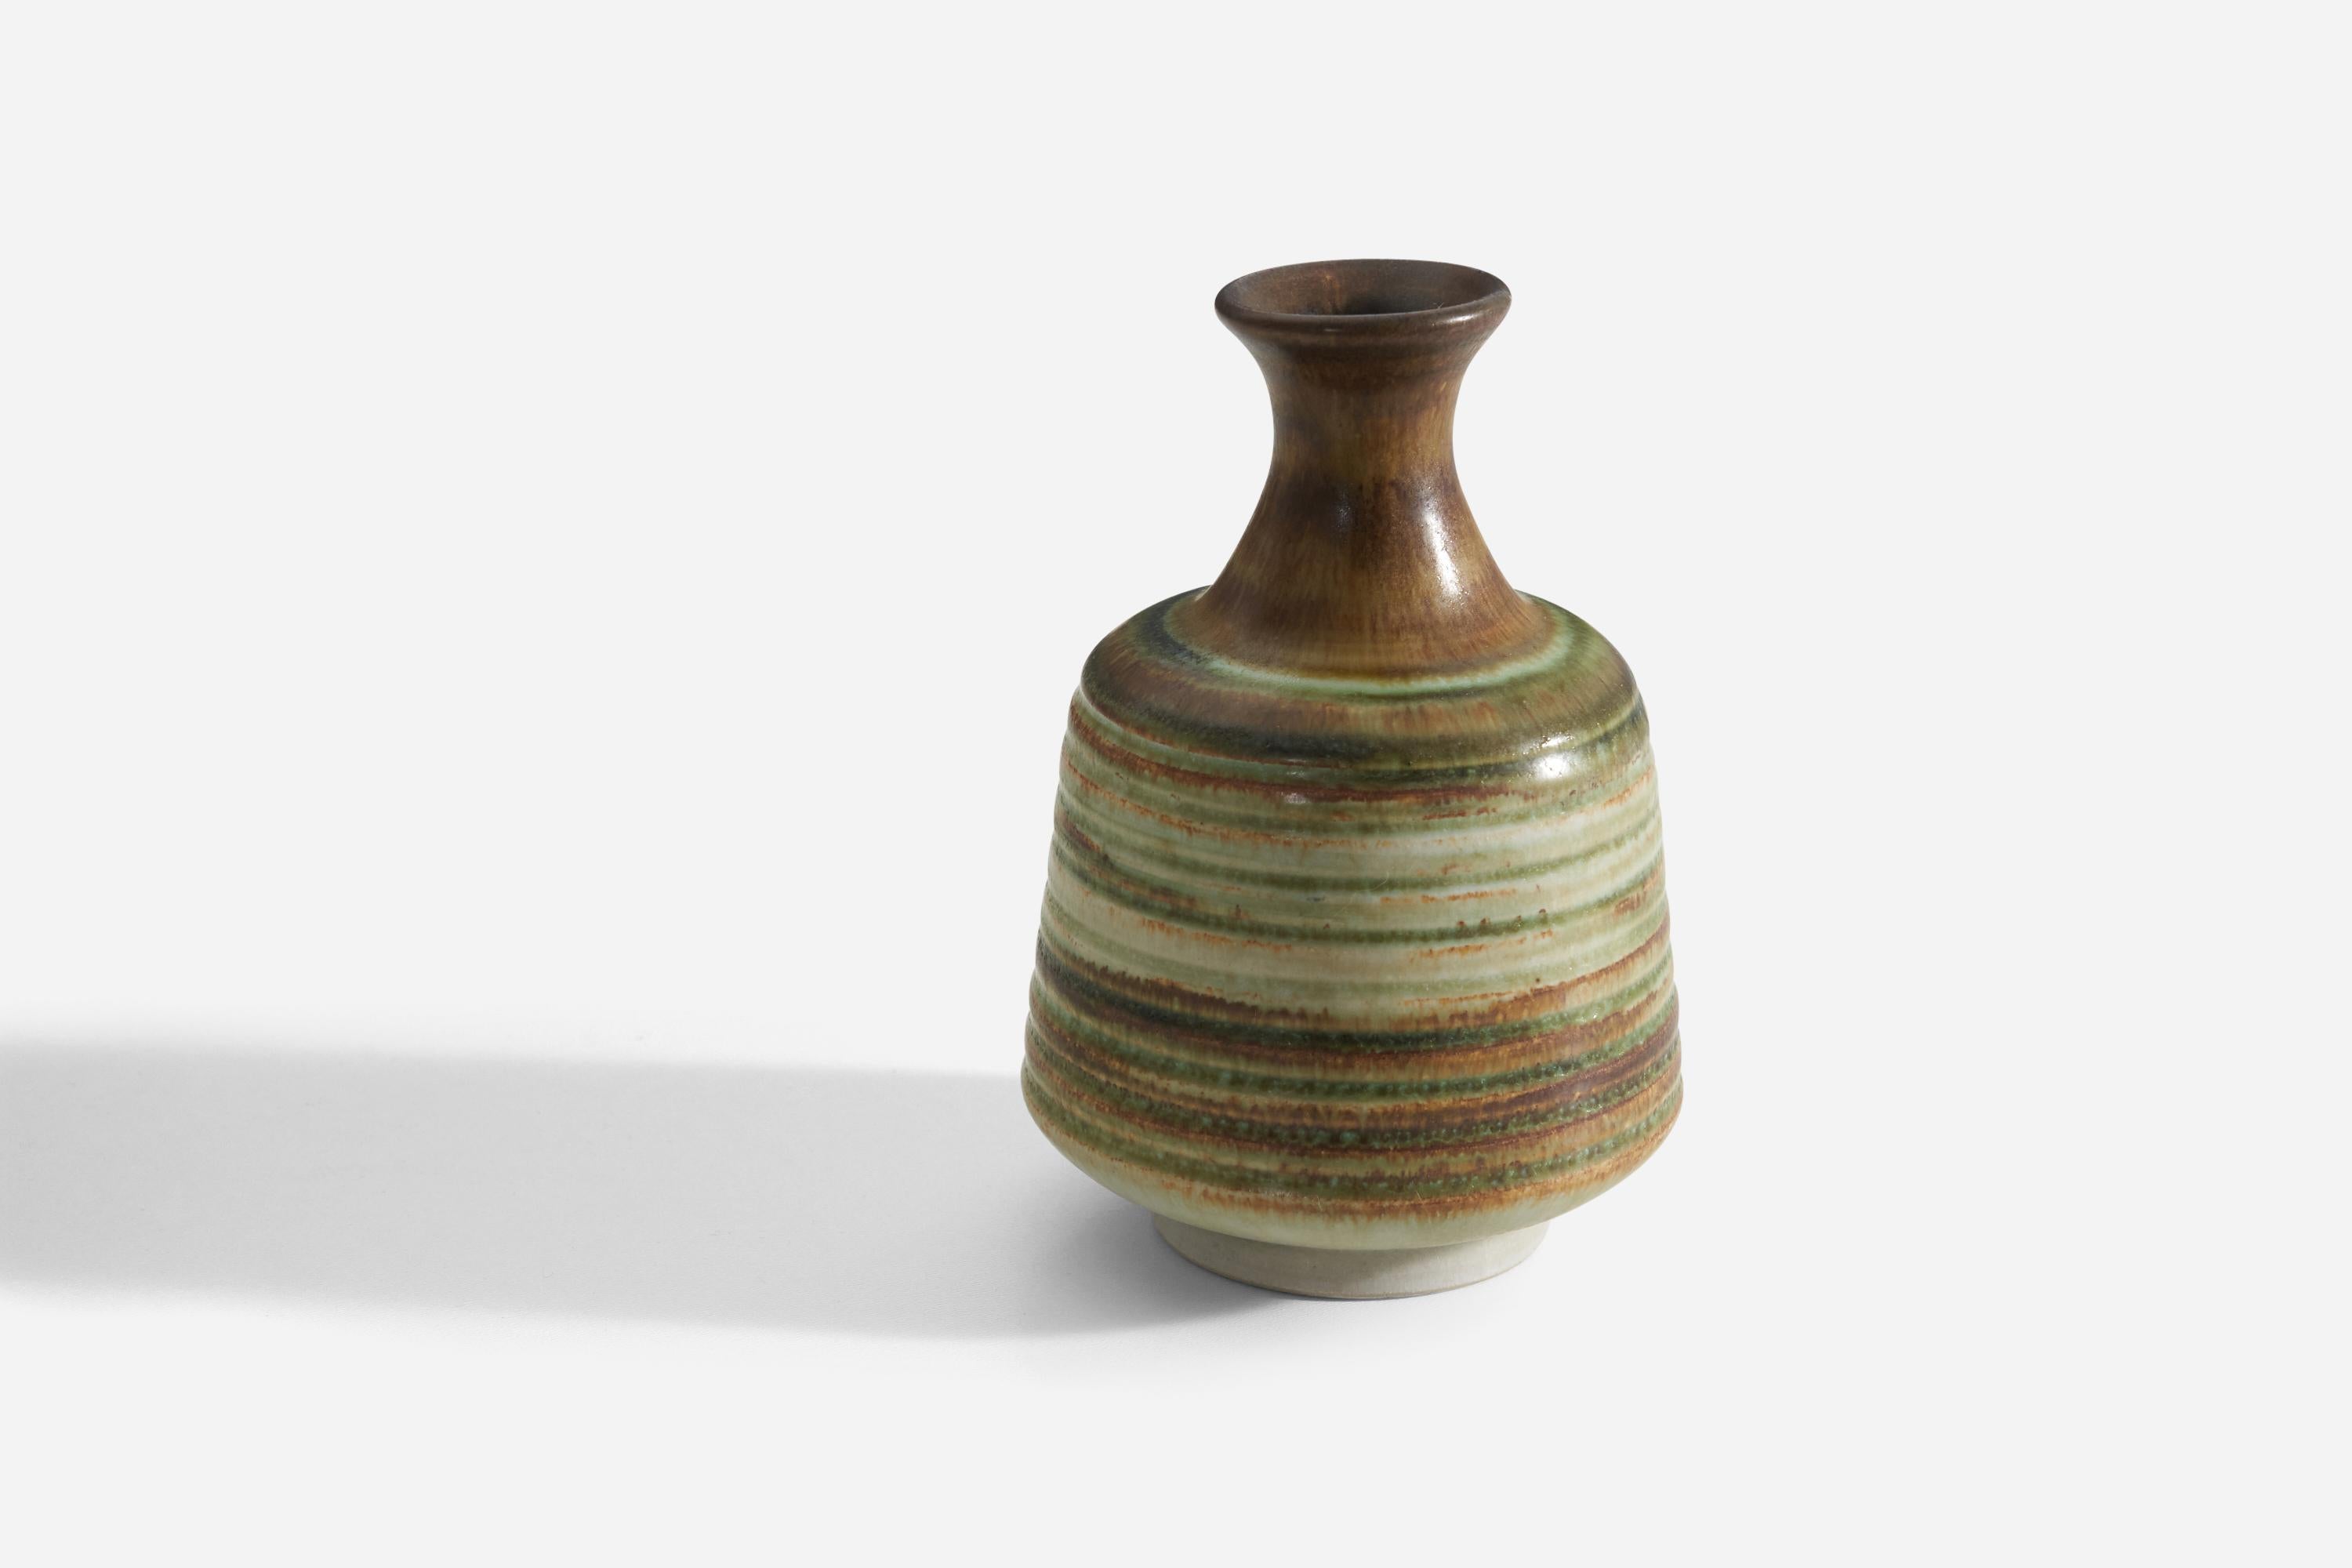 A brown, green and beige-glazed stoneware vase designed and produced by Höganäs Keramik, Sweden, 1950s.

